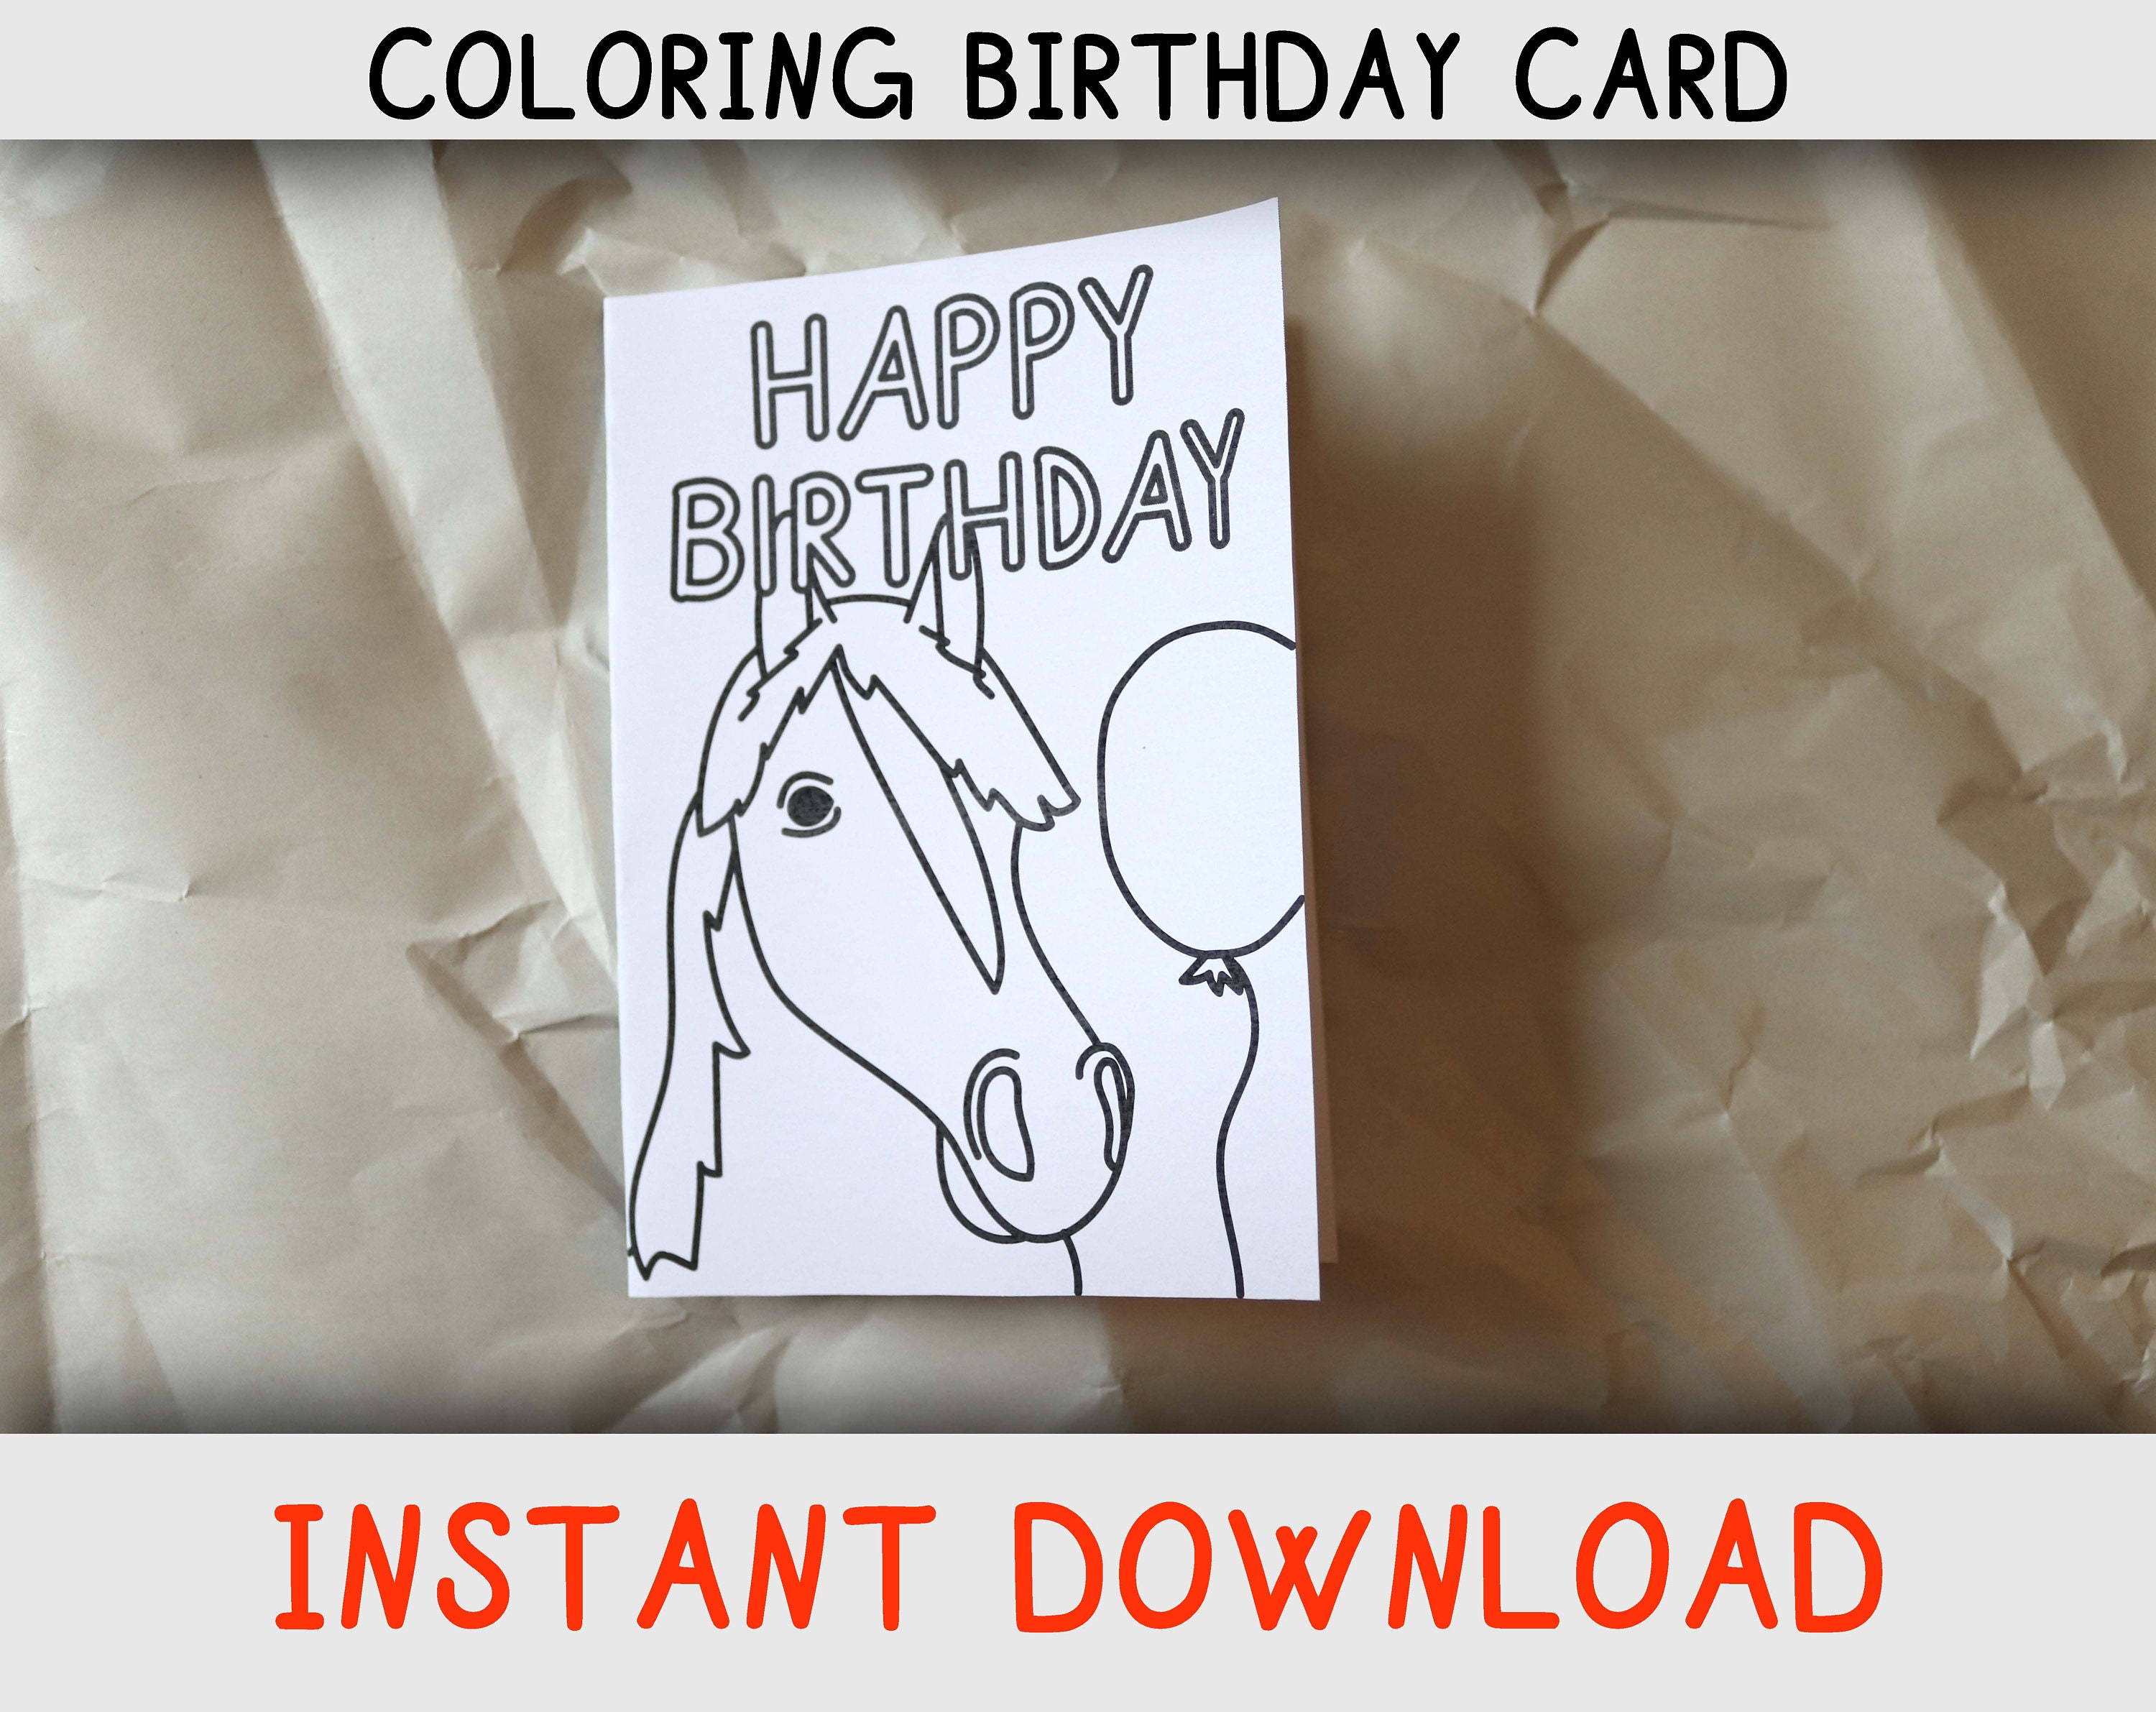 Happy birthday coloring card for kids who loves horses and coloring pages for horse lovers instant download printable birthday card